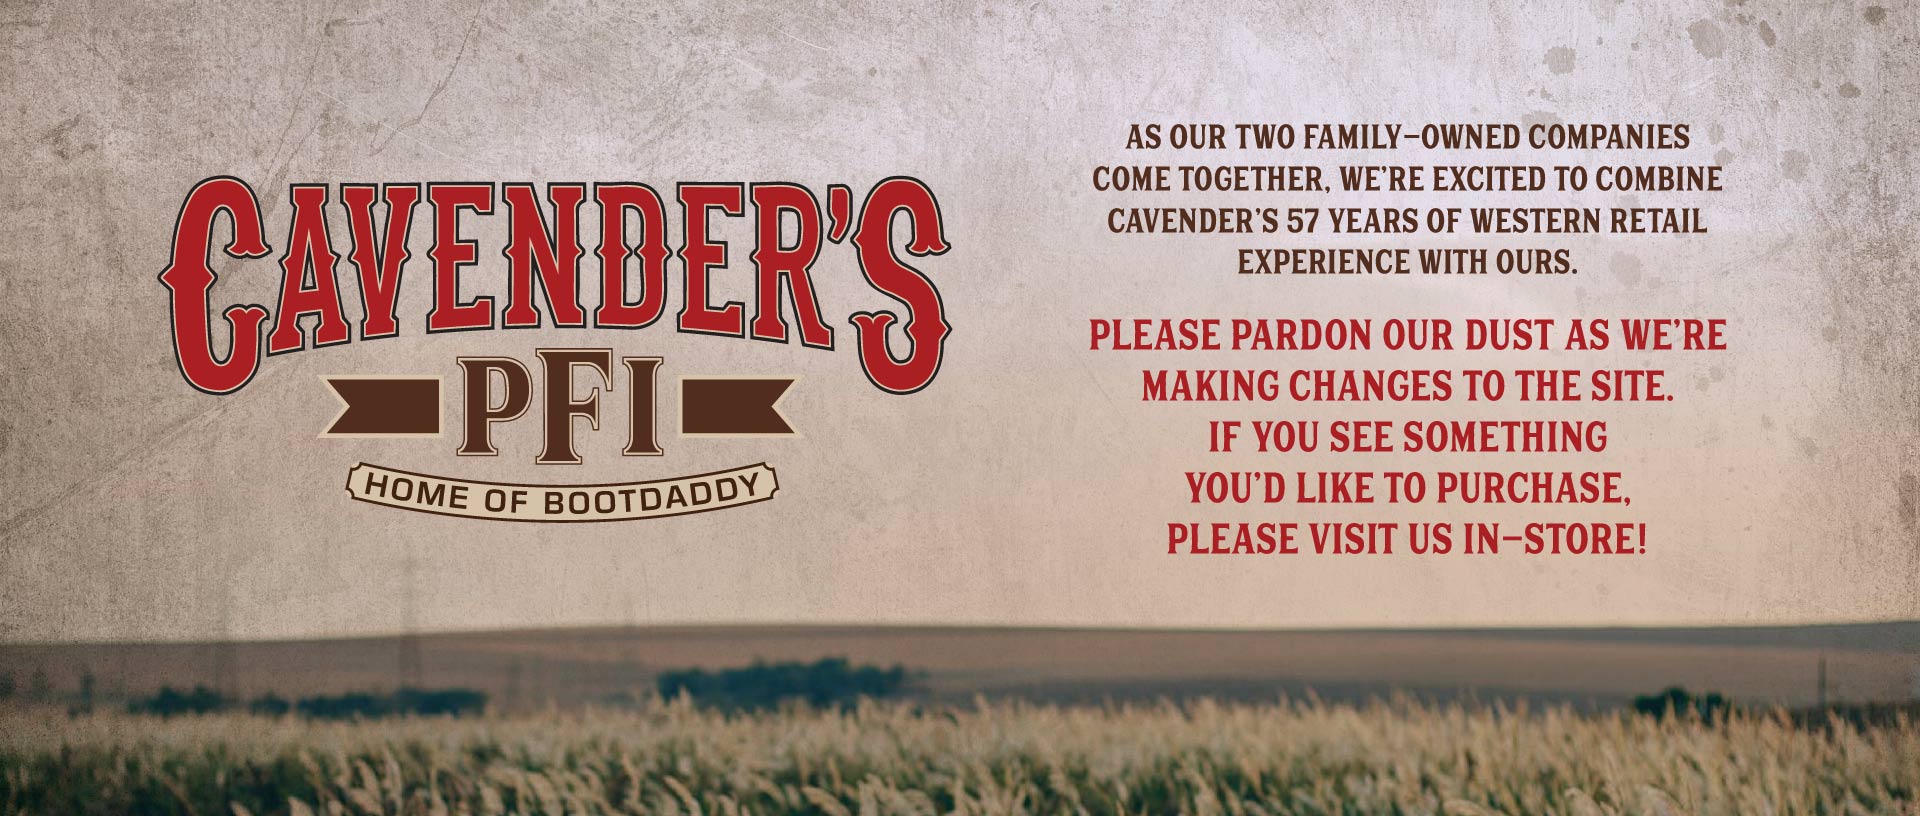 cavender's pfi home of bootdaddy visit in-store to purchase